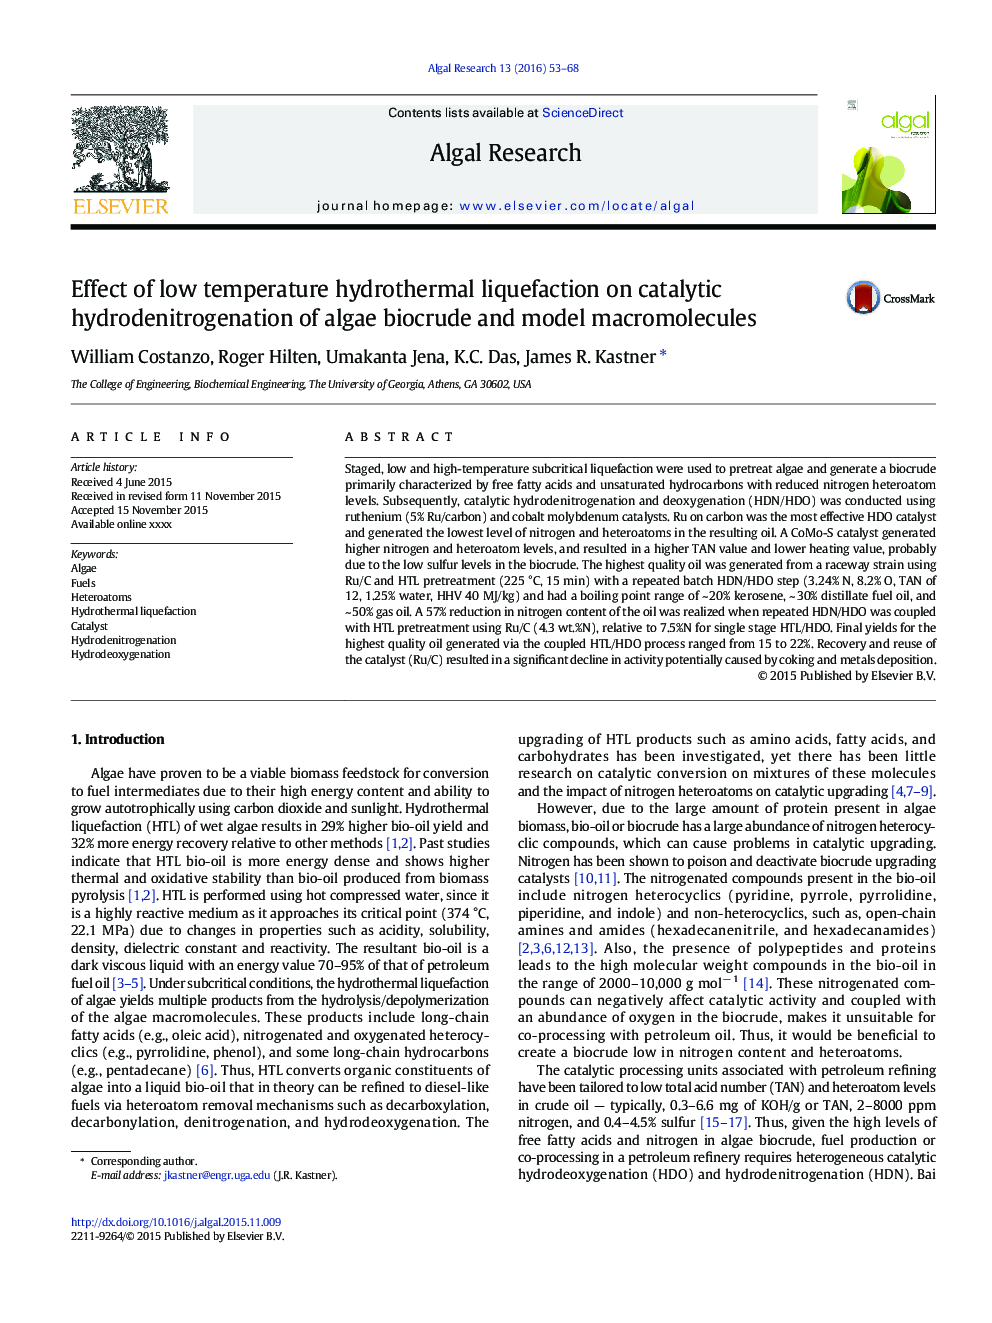 Effect of low temperature hydrothermal liquefaction on catalytic hydrodenitrogenation of algae biocrude and model macromolecules